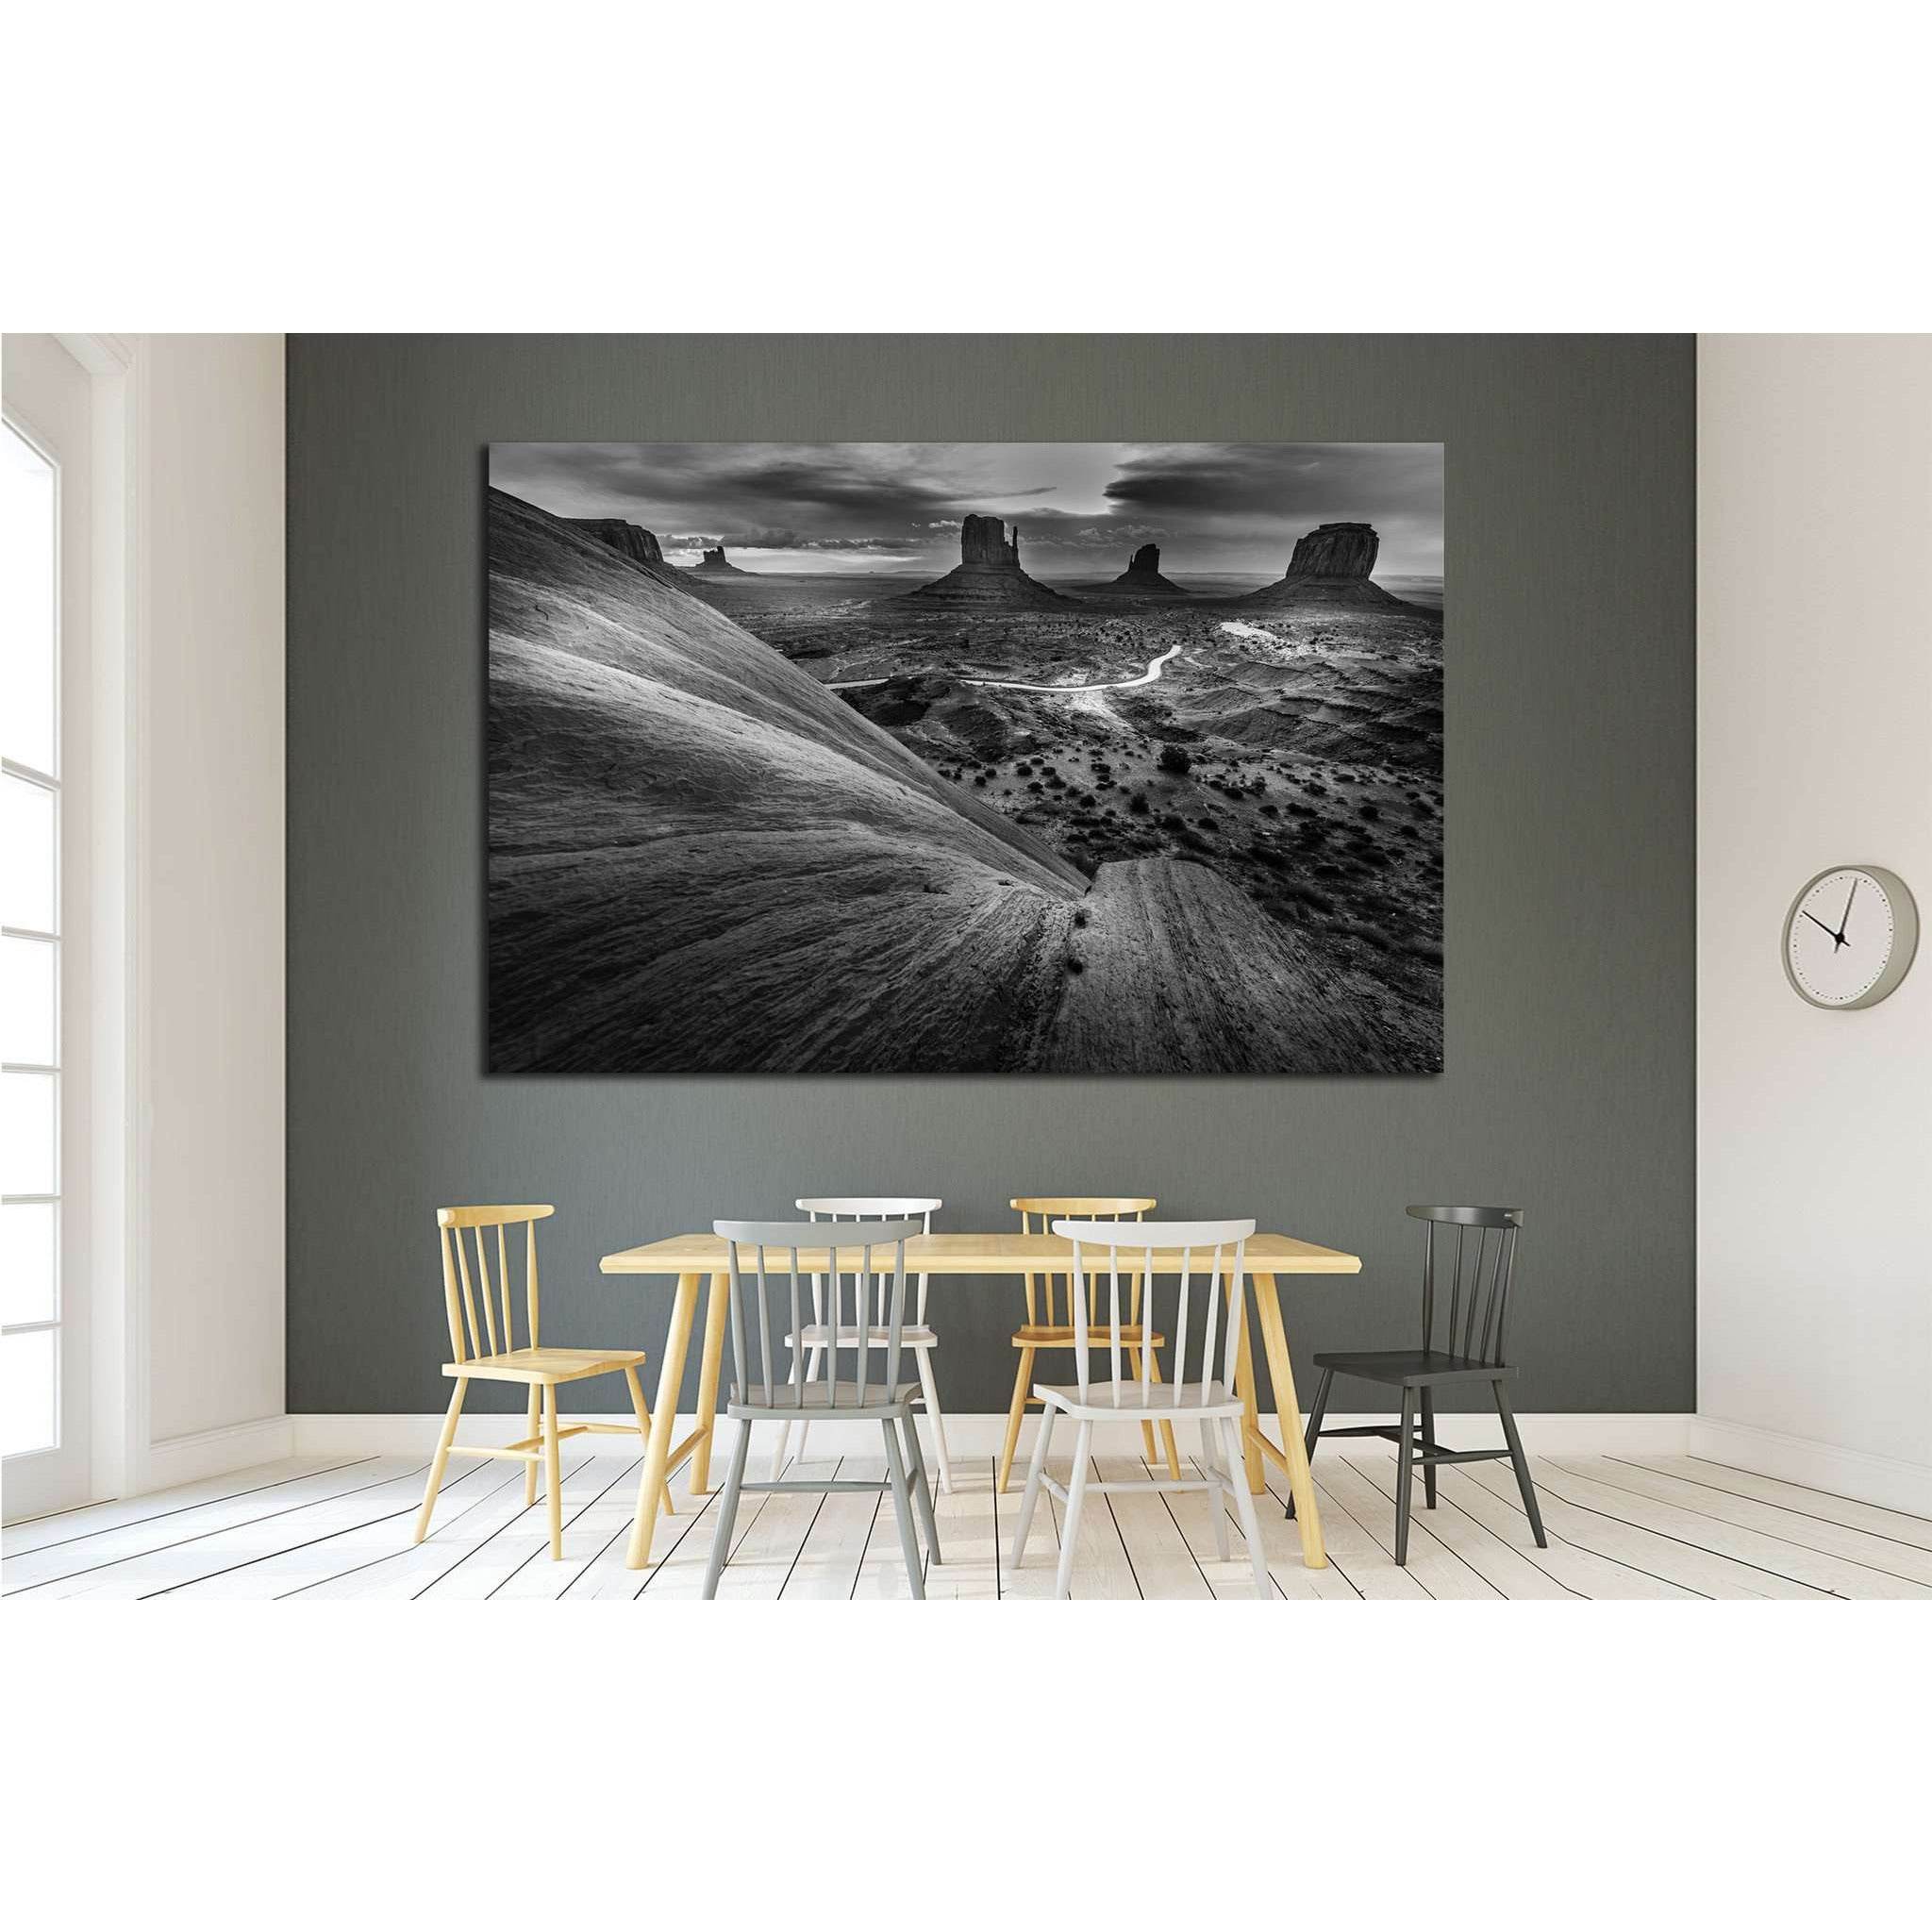 Monument Valley Black and White Famous American Landscapes №1992 Ready to Hang Canvas Print